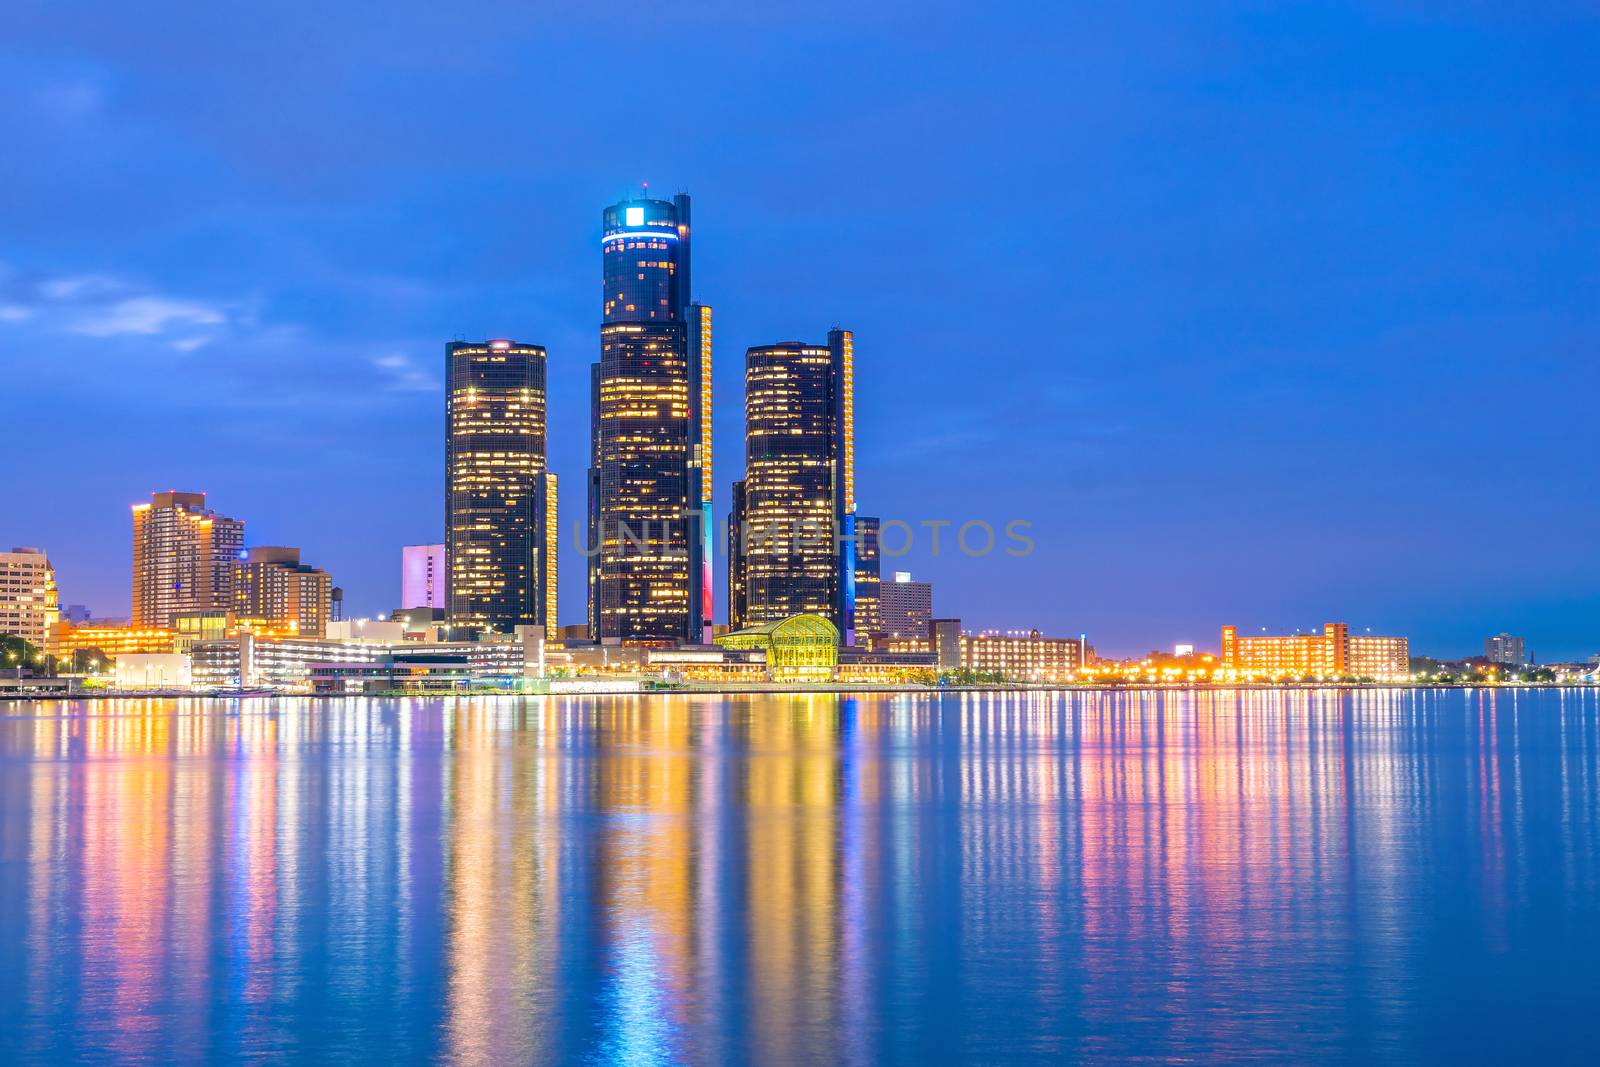 Detroit skyline in Michigan, USA at sunset by f11photo